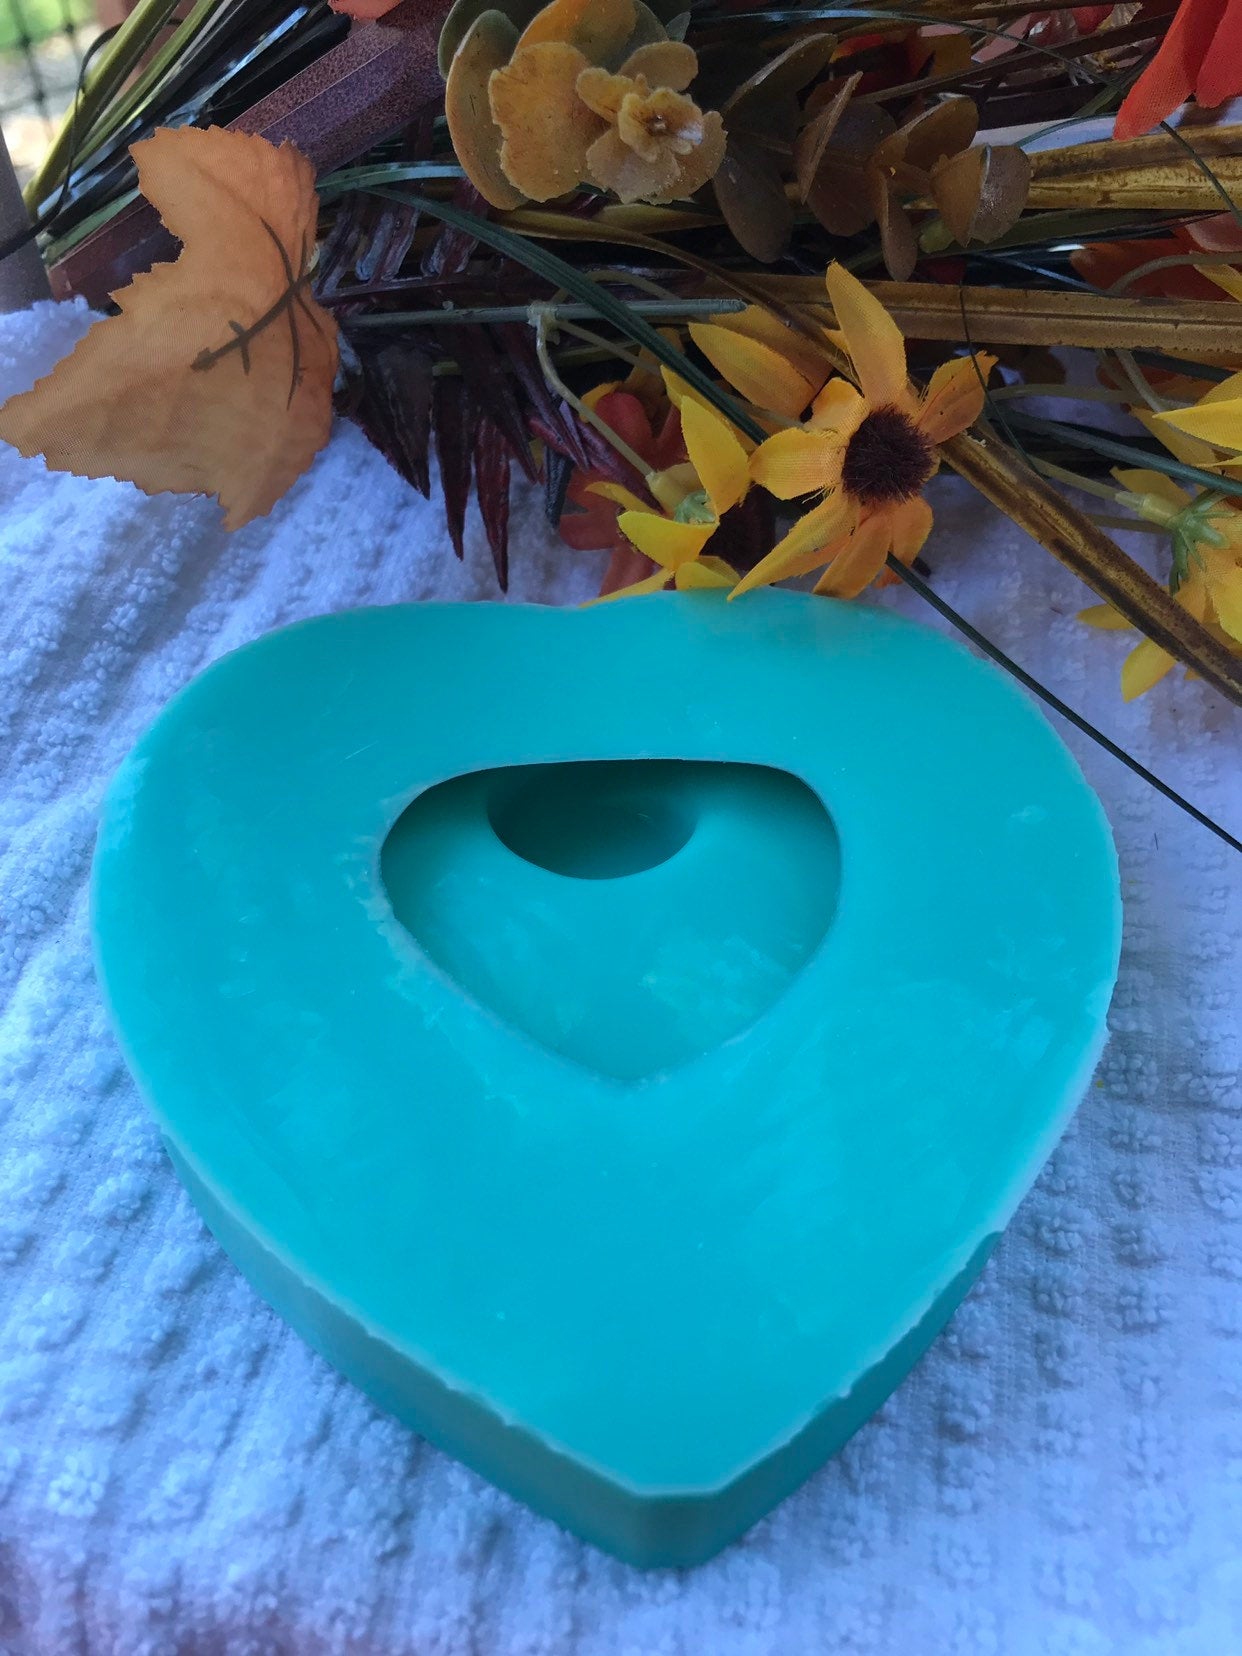 Heart Silicone Molds for Resin,Heart Resin Mold,Epoxy Resin Molds for  Flowers Preservation,Heart Coaster Casting Molds 